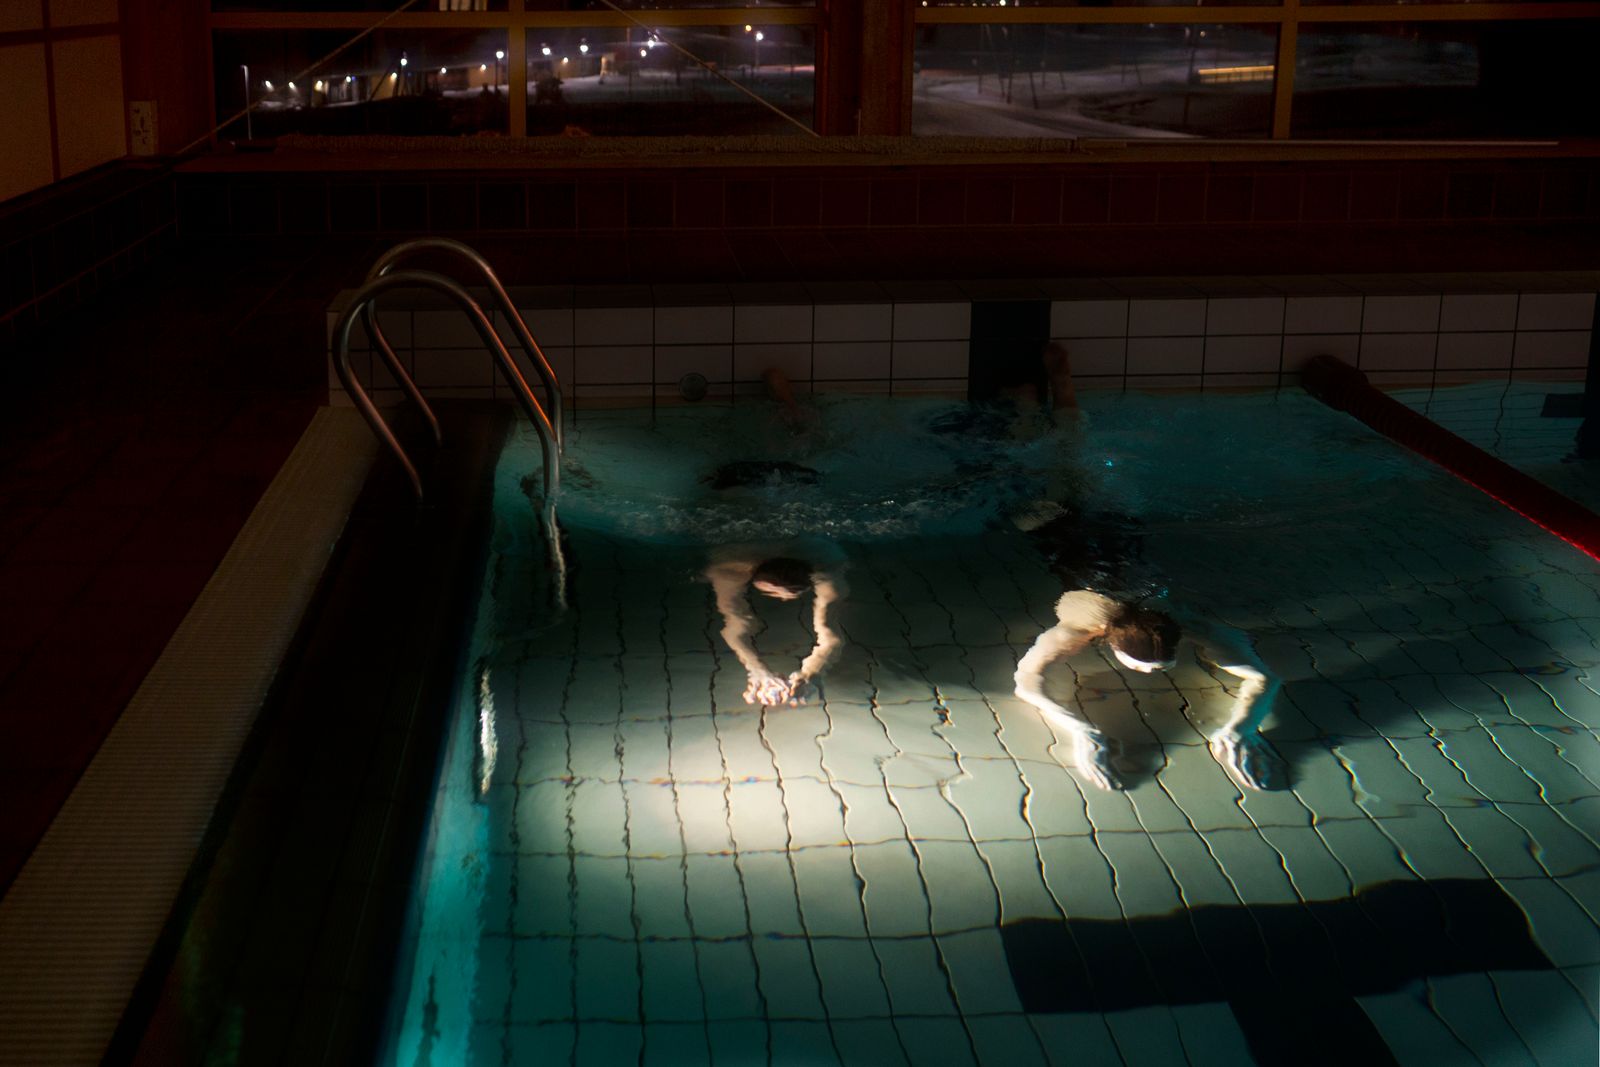 © Axelle de Russé - Two young students from the Longyearbyen University of Science enjoy this swimming pool after school. February 2019, 7 pm.